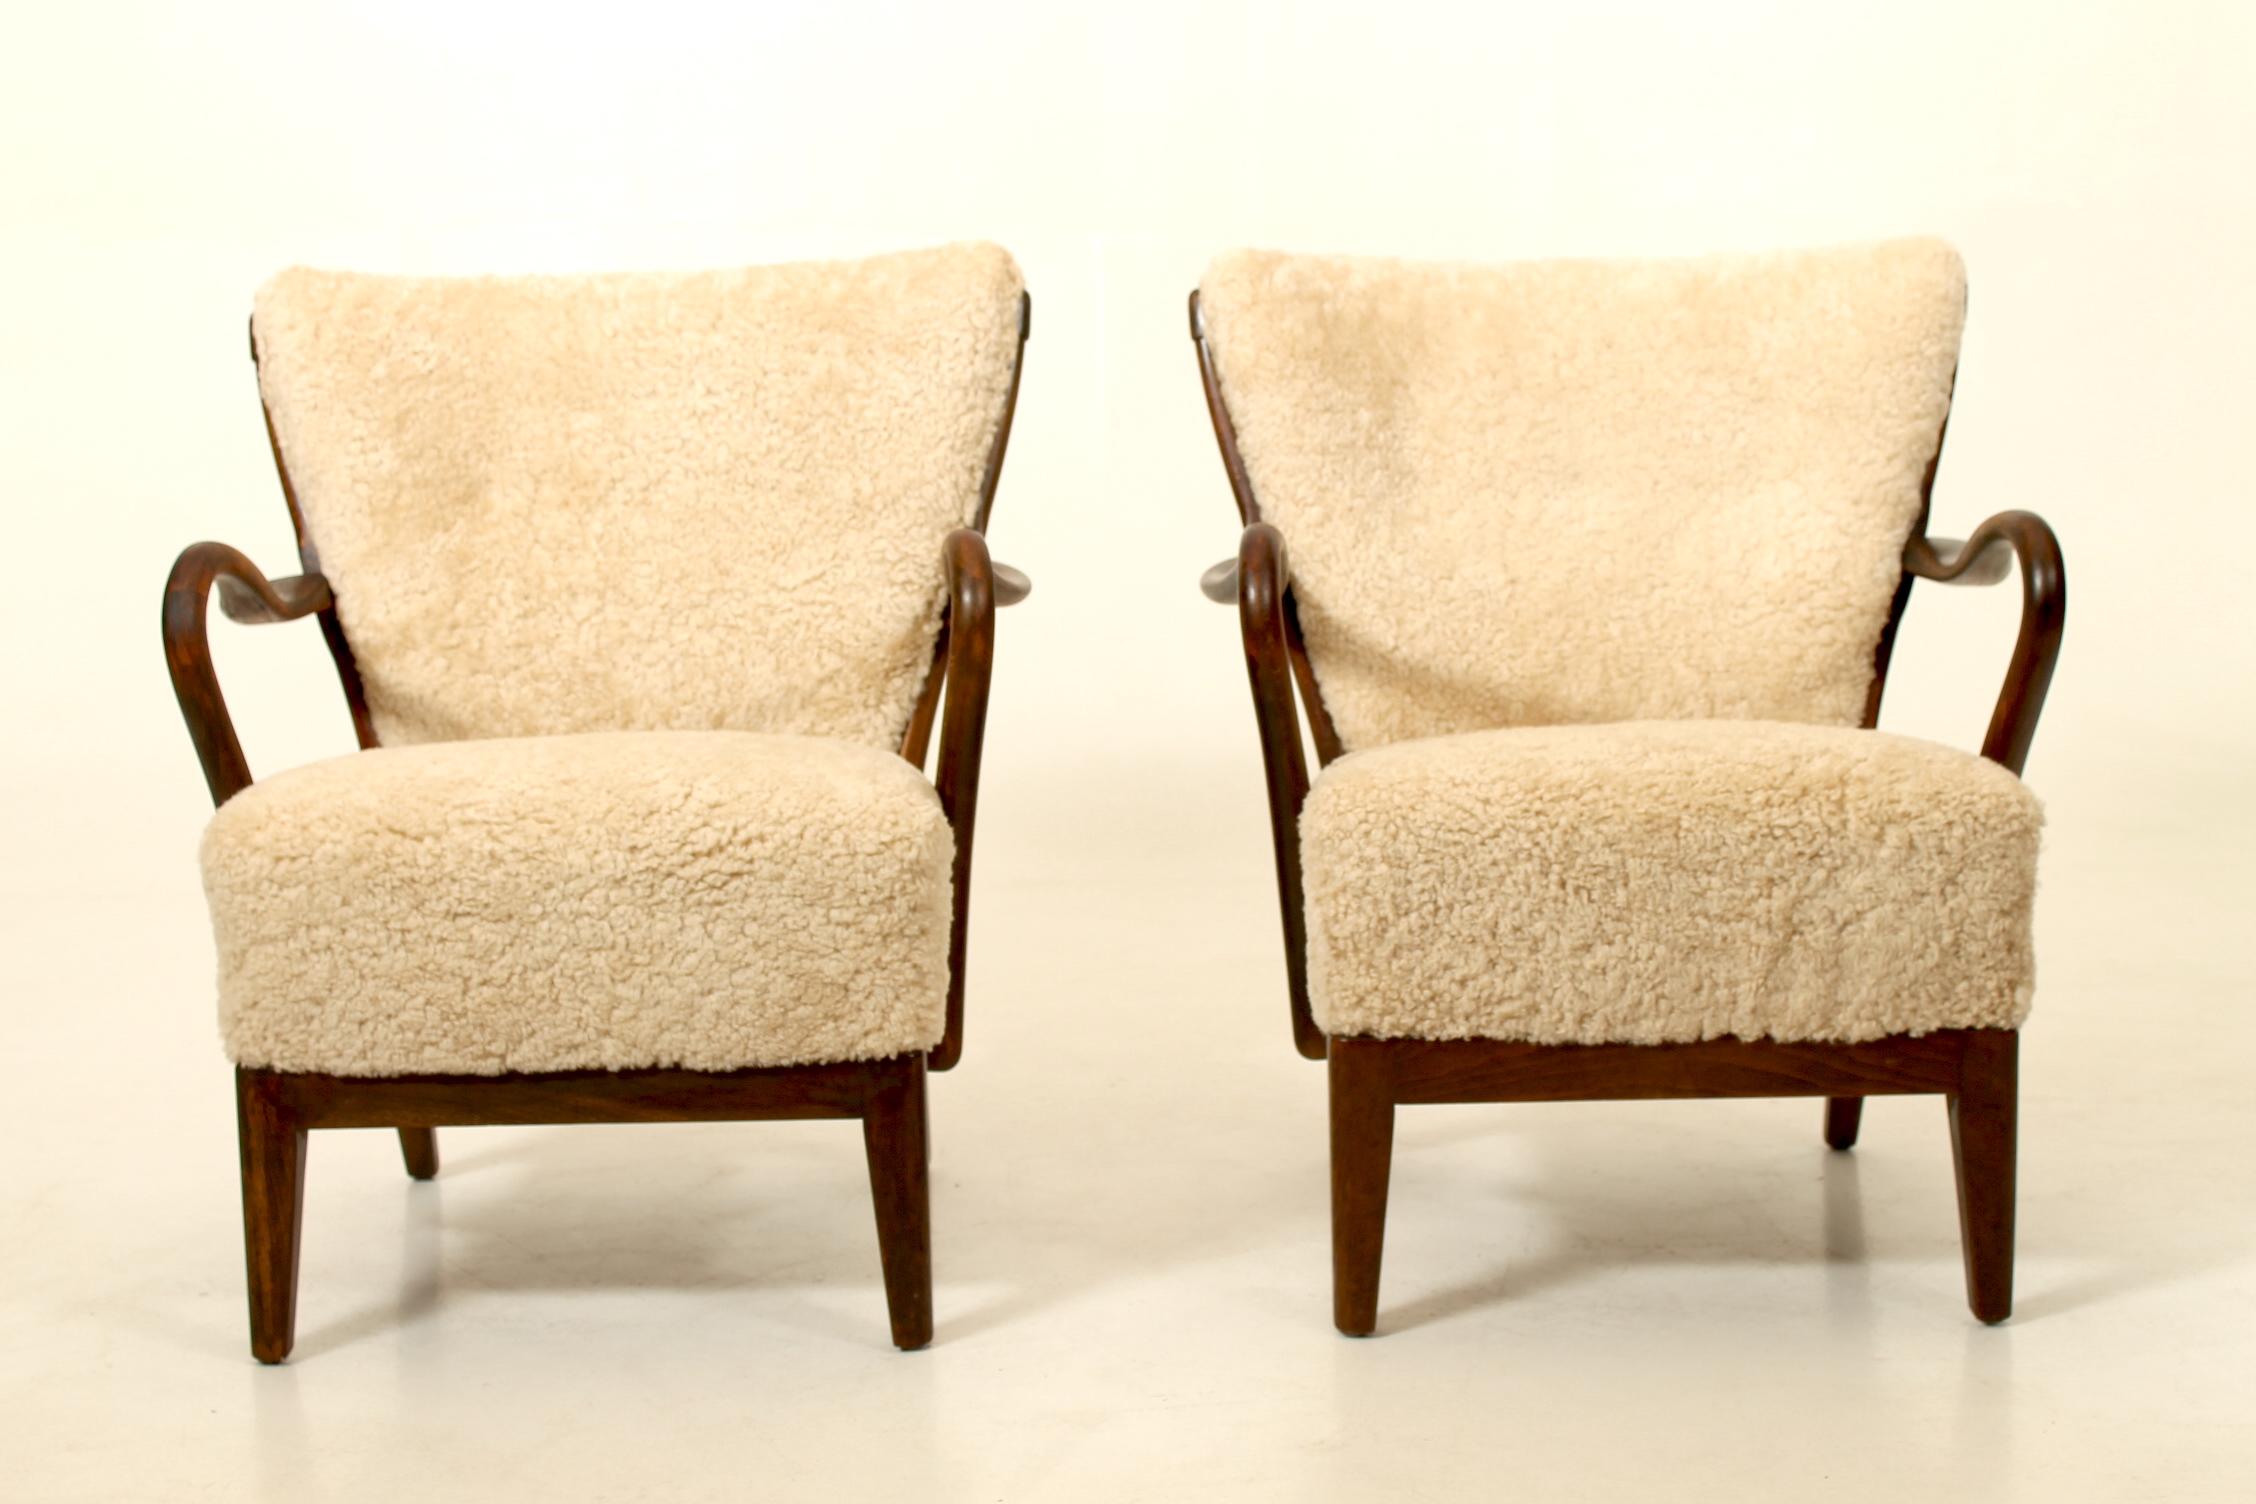 Pair of rare loungers designed by Alfred Christensen in the 1940s and produced by Slagelse Møbelværk. Restored with new sheepskin. 

